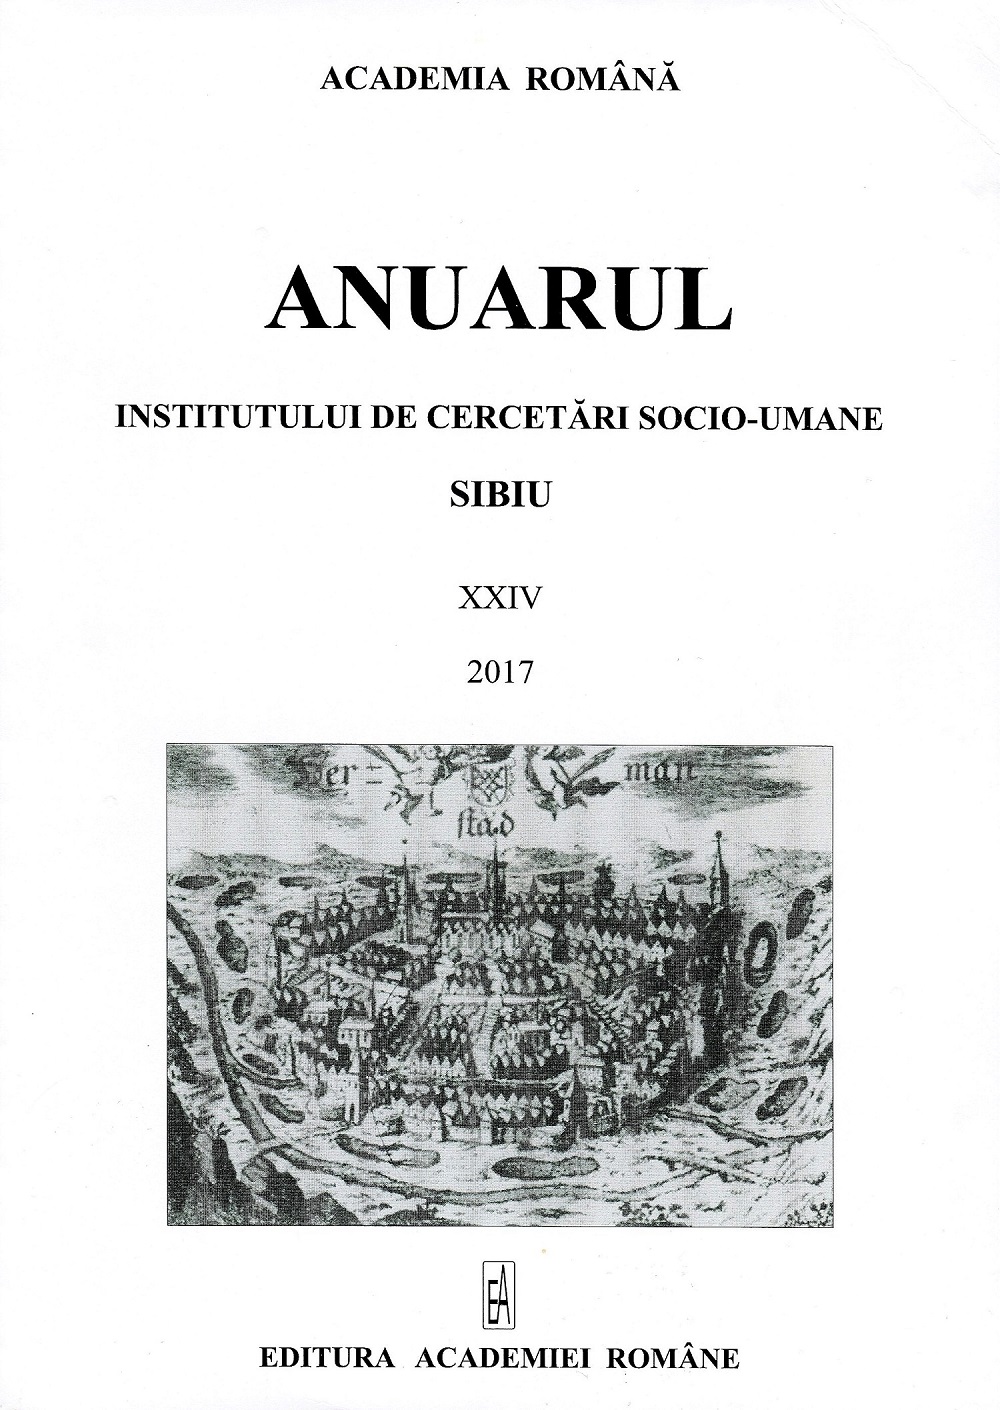 Structures, Cadres, and Methods of the Securitate
Used within its Activities on the German Minority in Romania 
(1948−1964) Cover Image